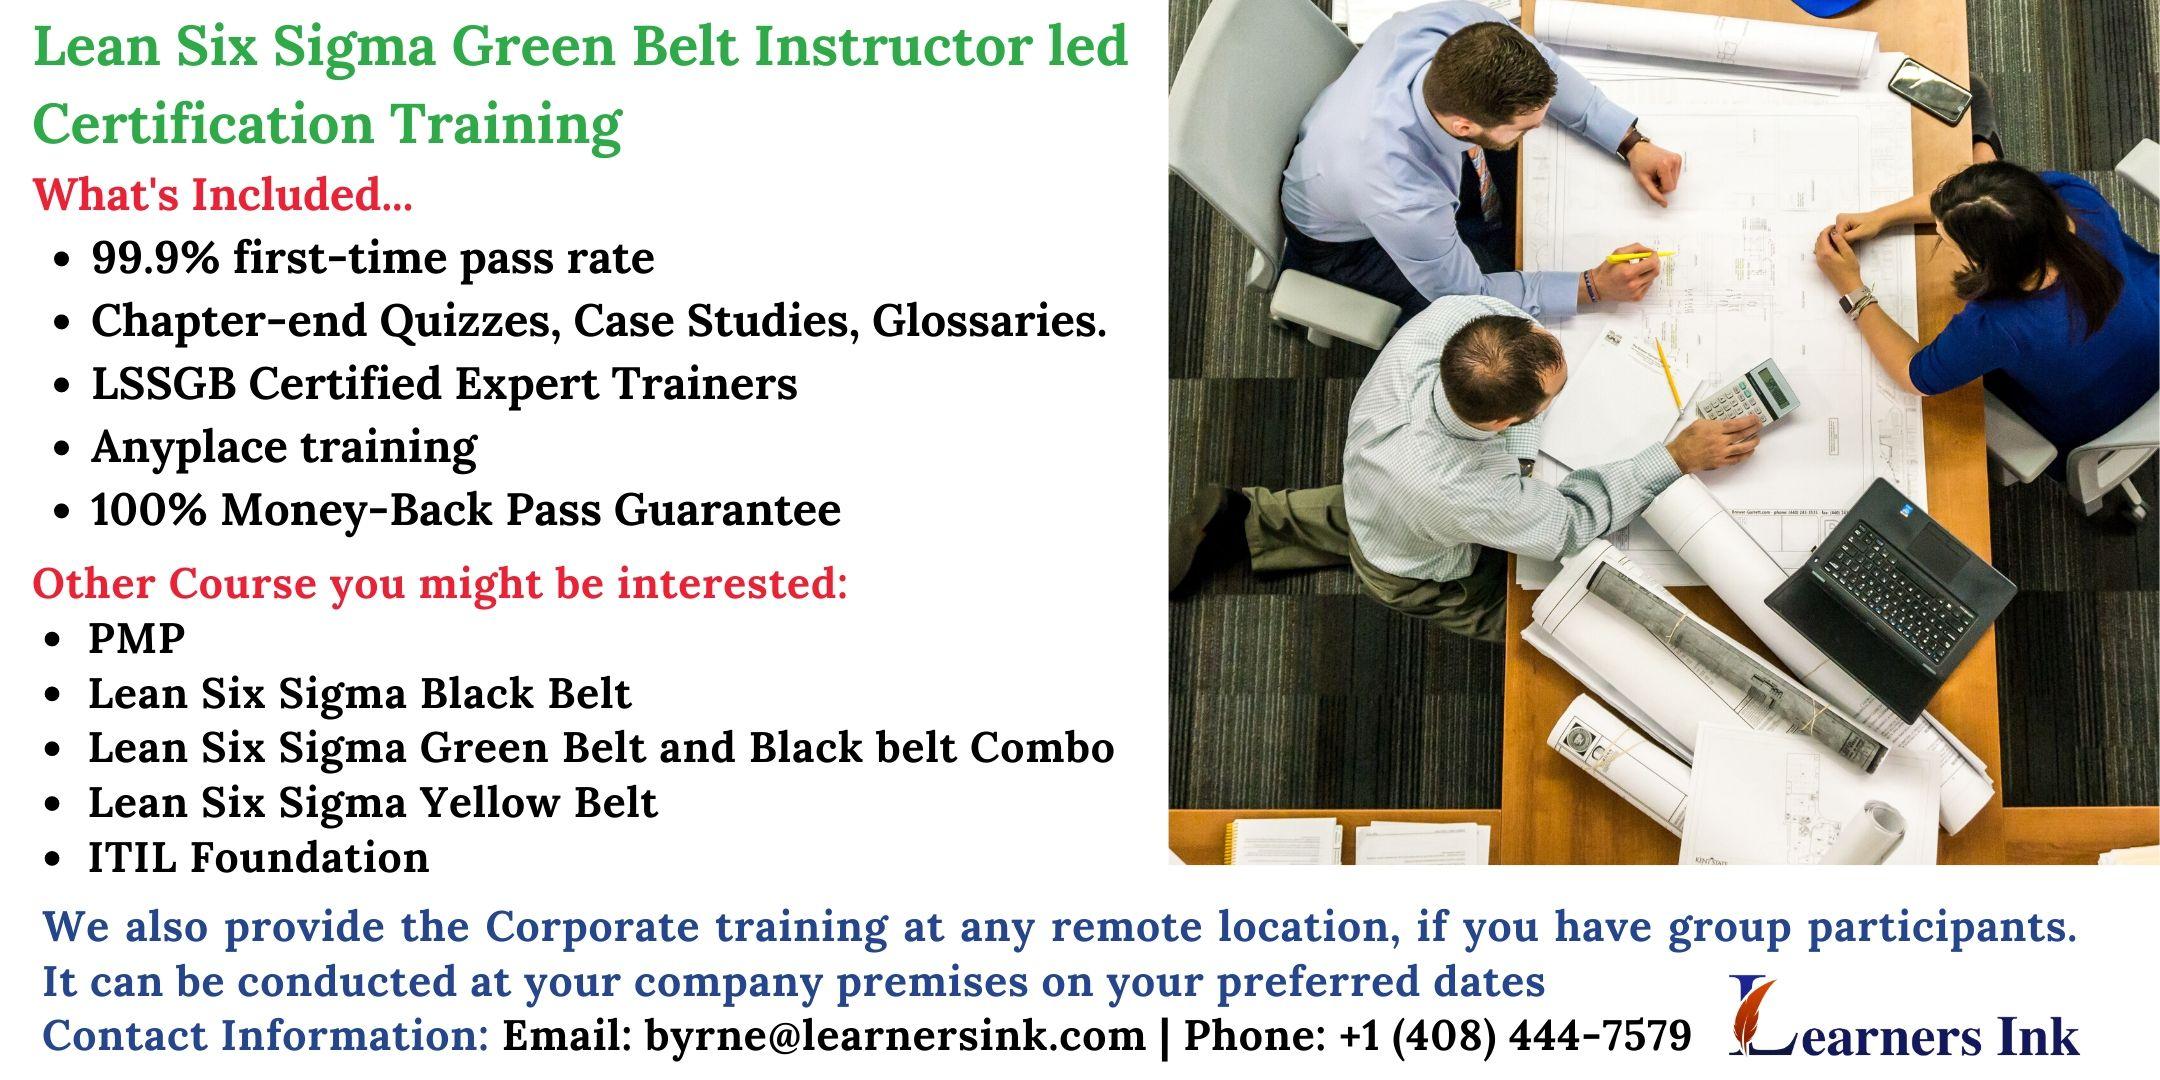 Lean Six Sigma Green Belt Certification Training Course (LSSGB) in Simi Valley